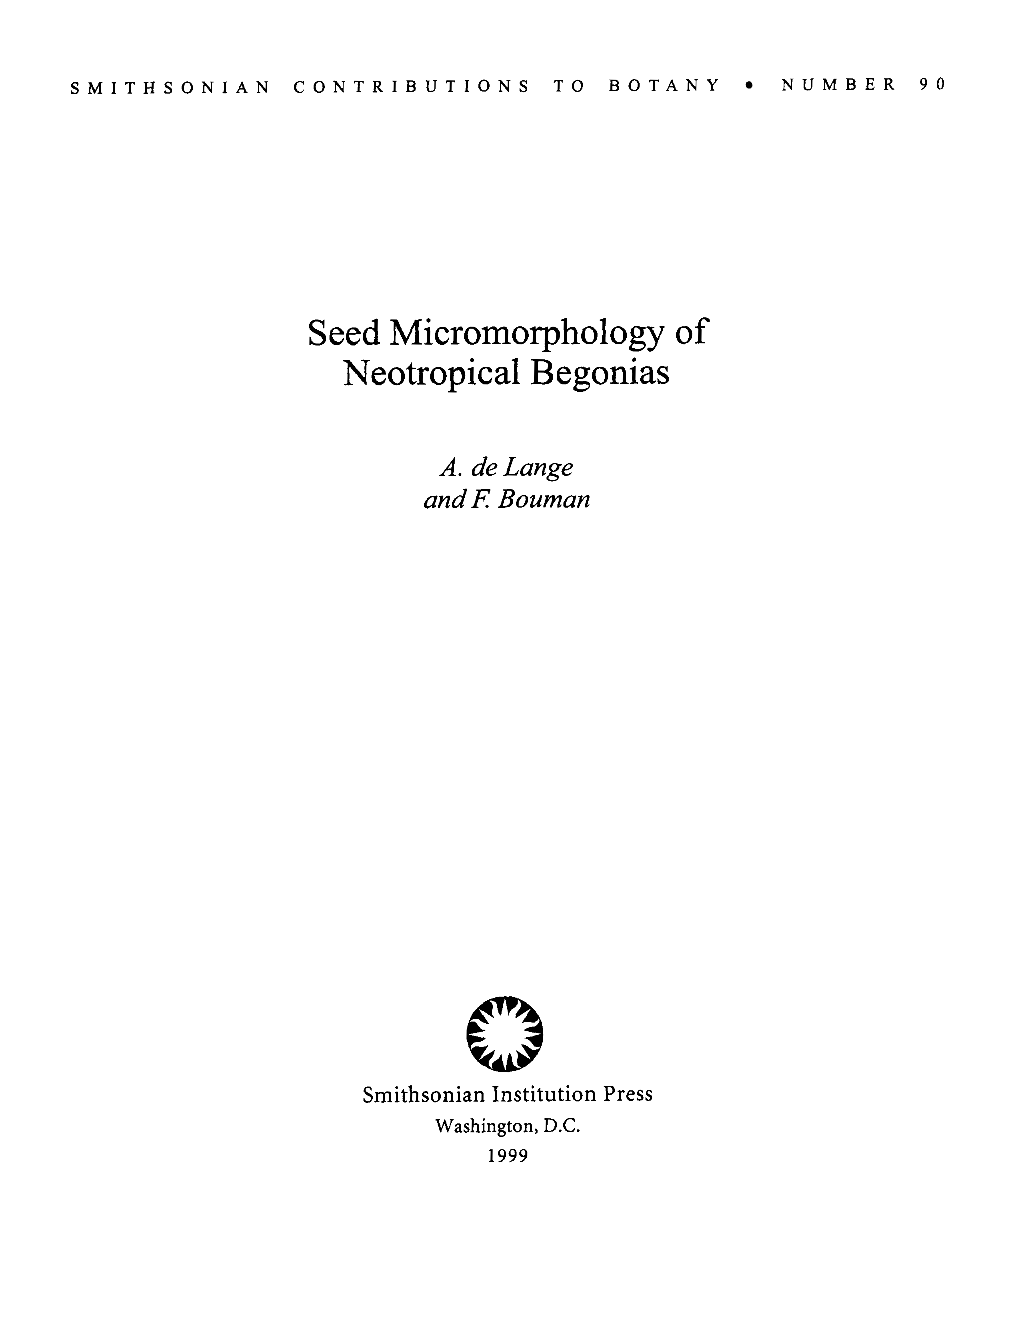 Seed Micromorphology of Neotropical Begonias